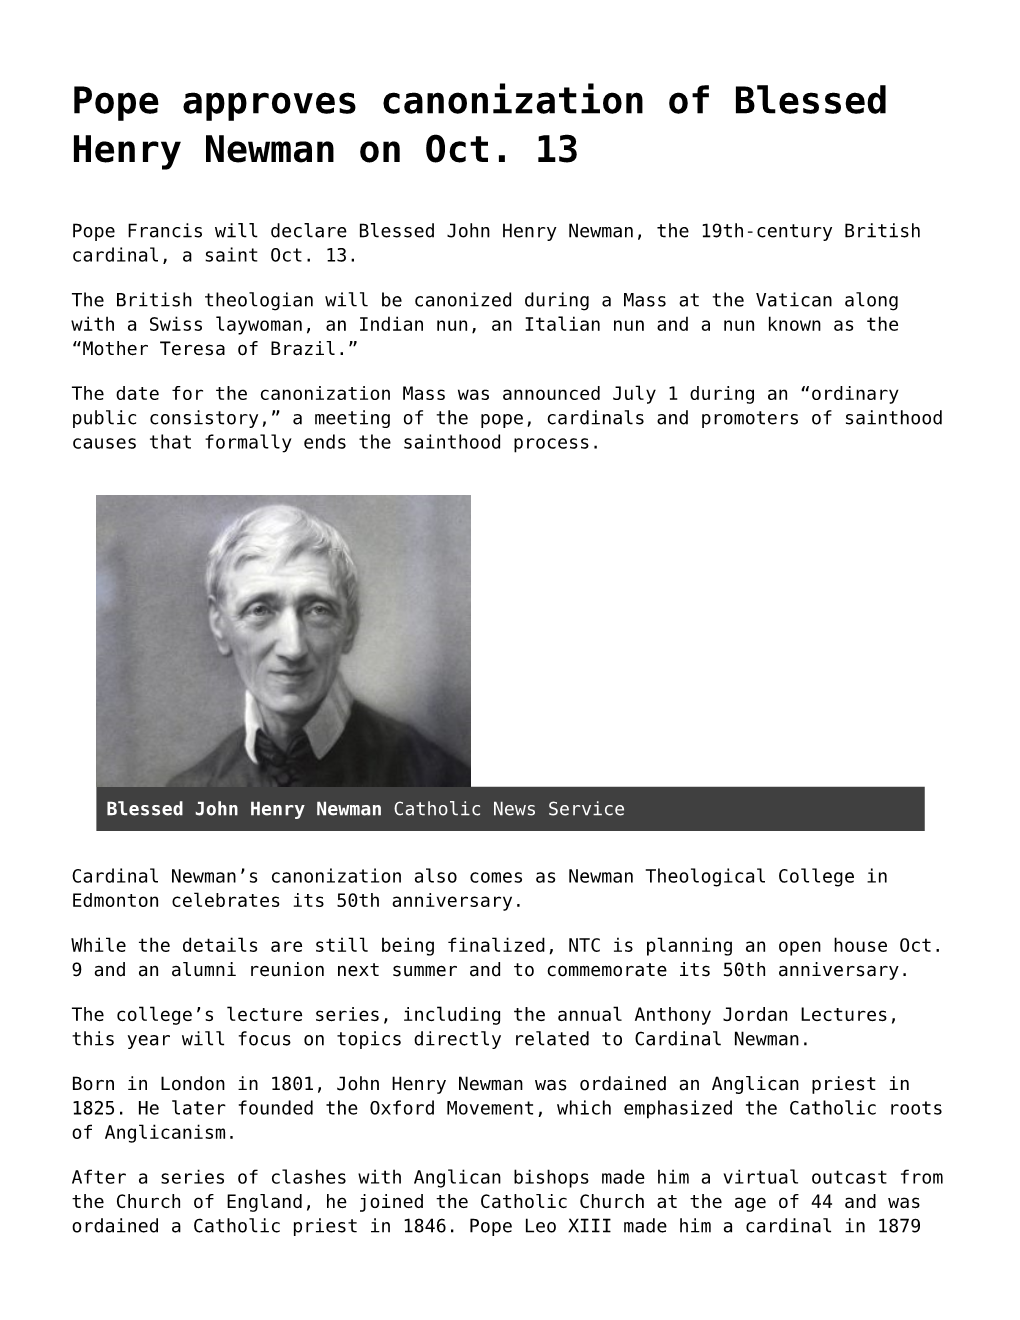 Pope Approves Canonization of Blessed Henry Newman on Oct. 13